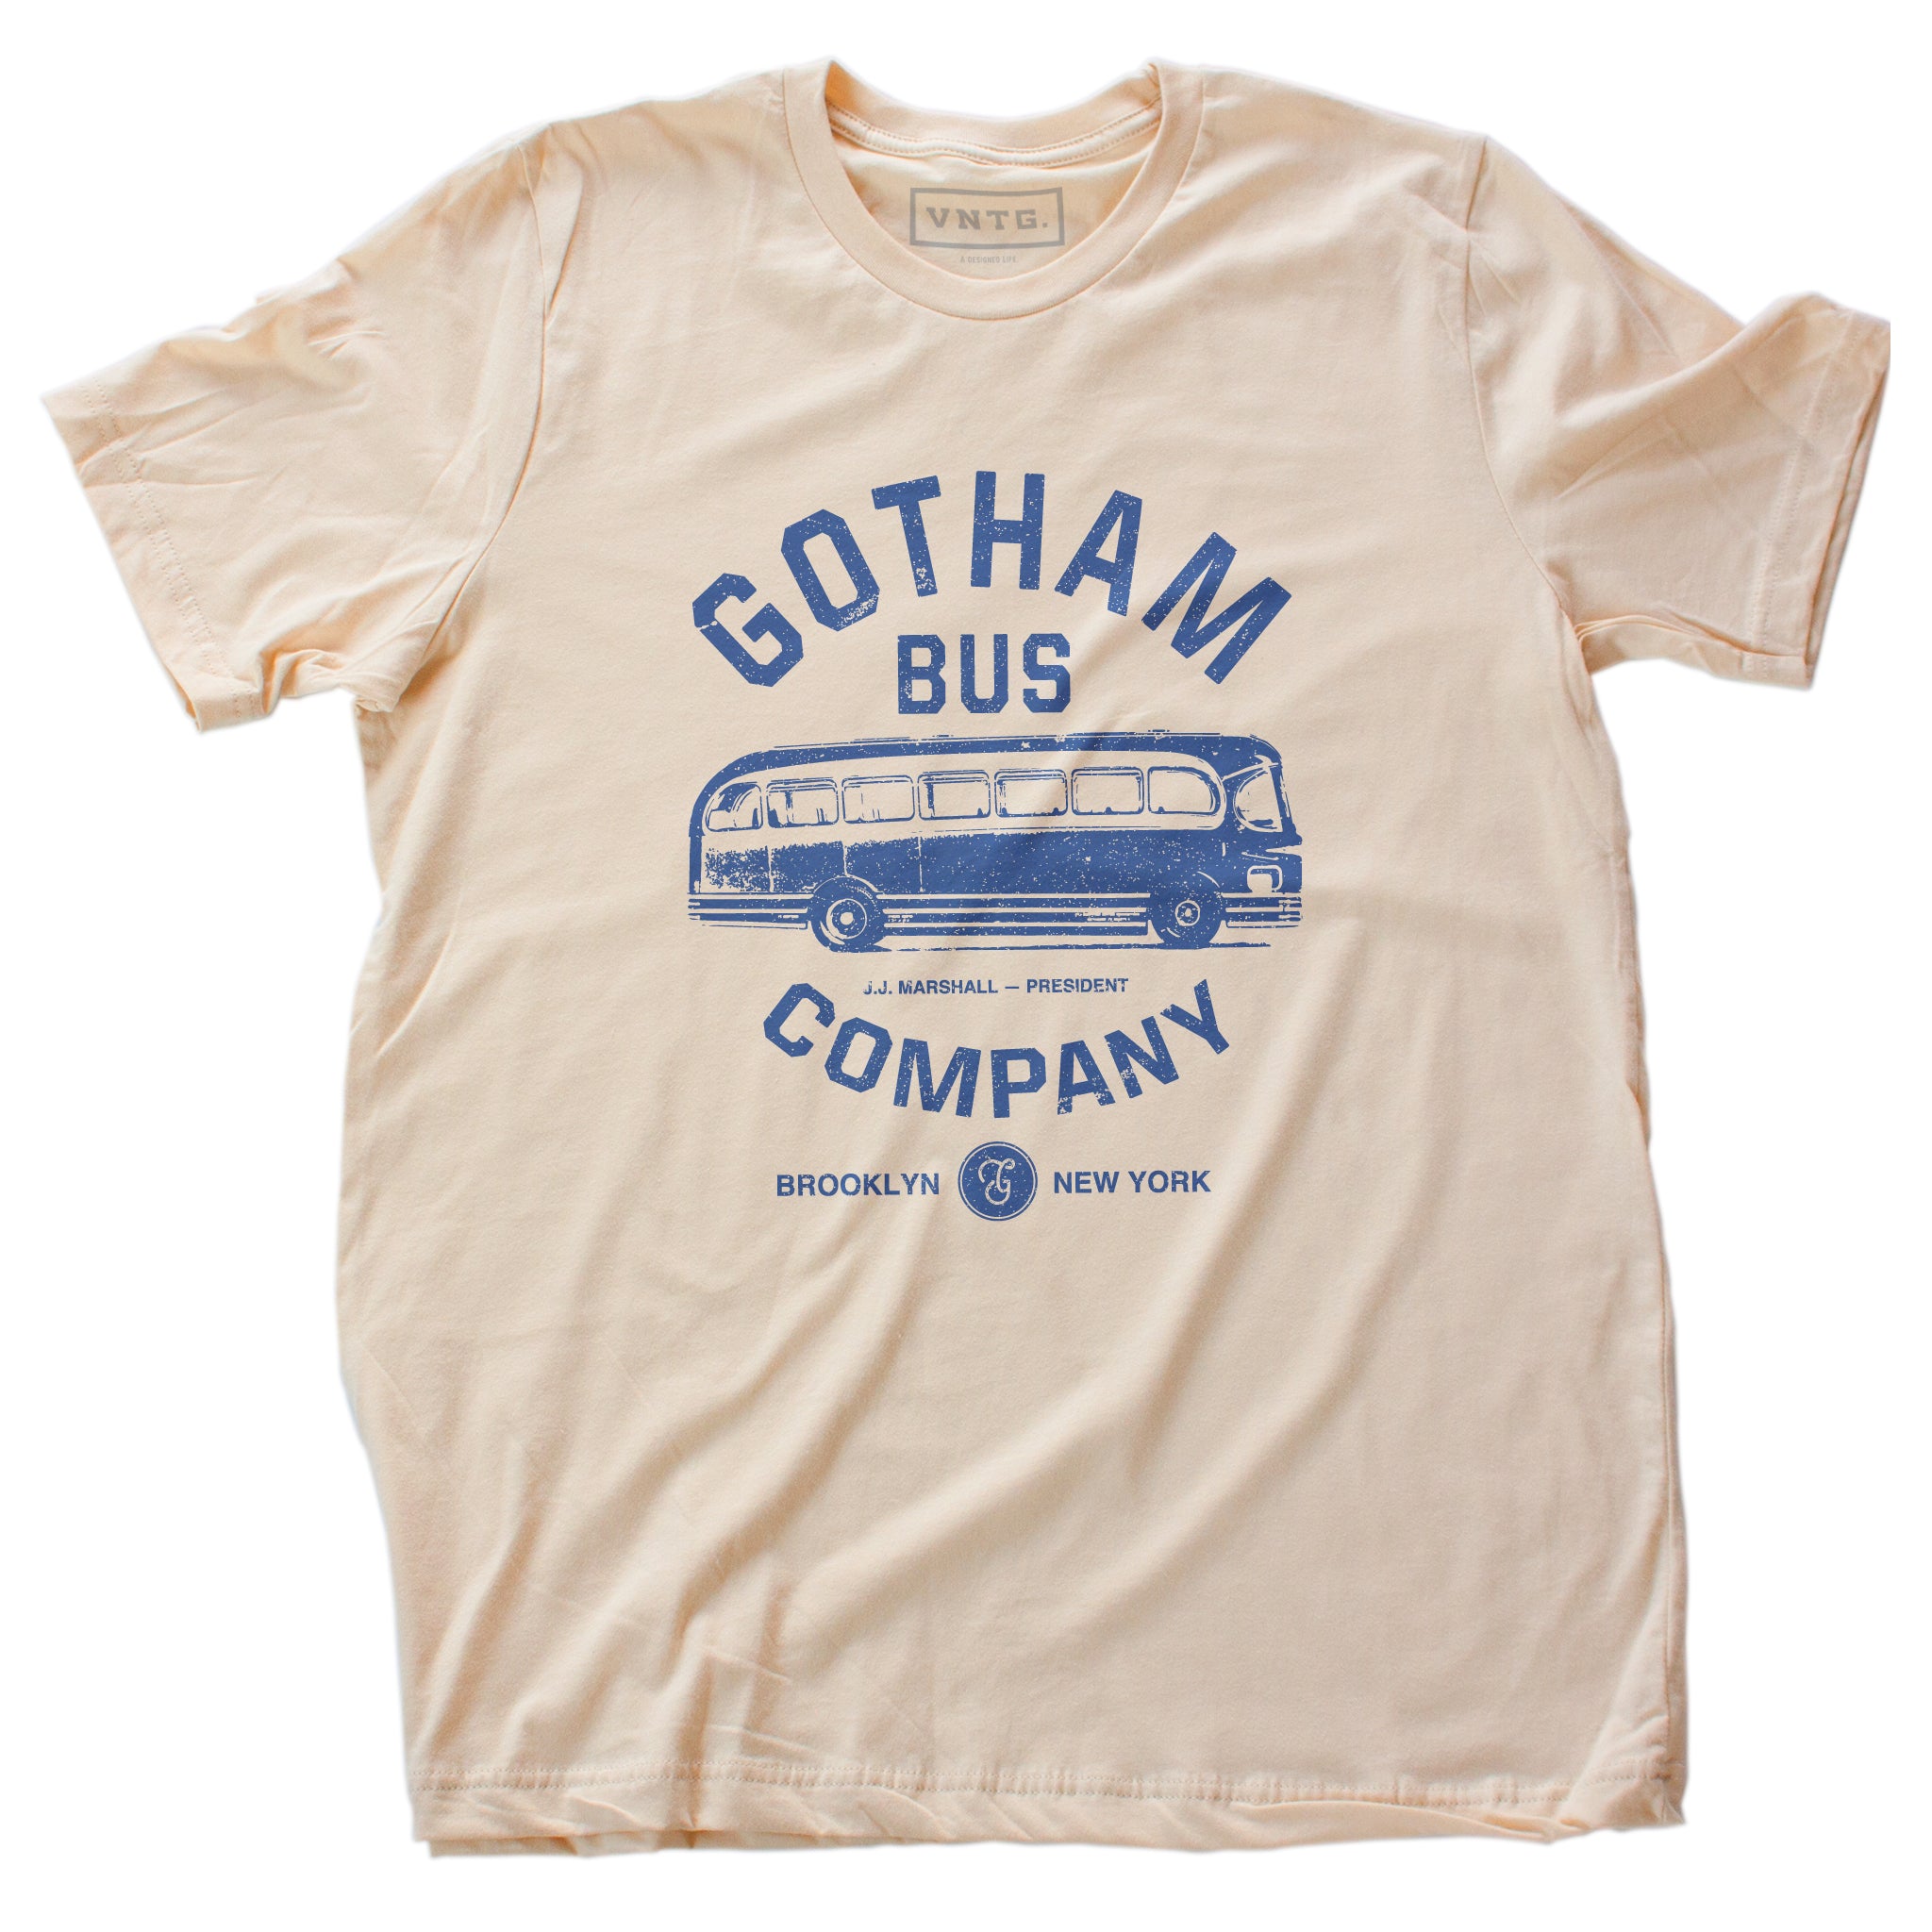 A retro t-shirt in Soft Cream, inspired by The Honeymooners, a 1950s Classic tv show featuring Jackie Gleason as Ralph Kramden. This shirt is a fictional promotion of the show’s Gotham Bus Company and shows a graphic of an old bus. By fashion brand VNTG, available from wolfsaint.net